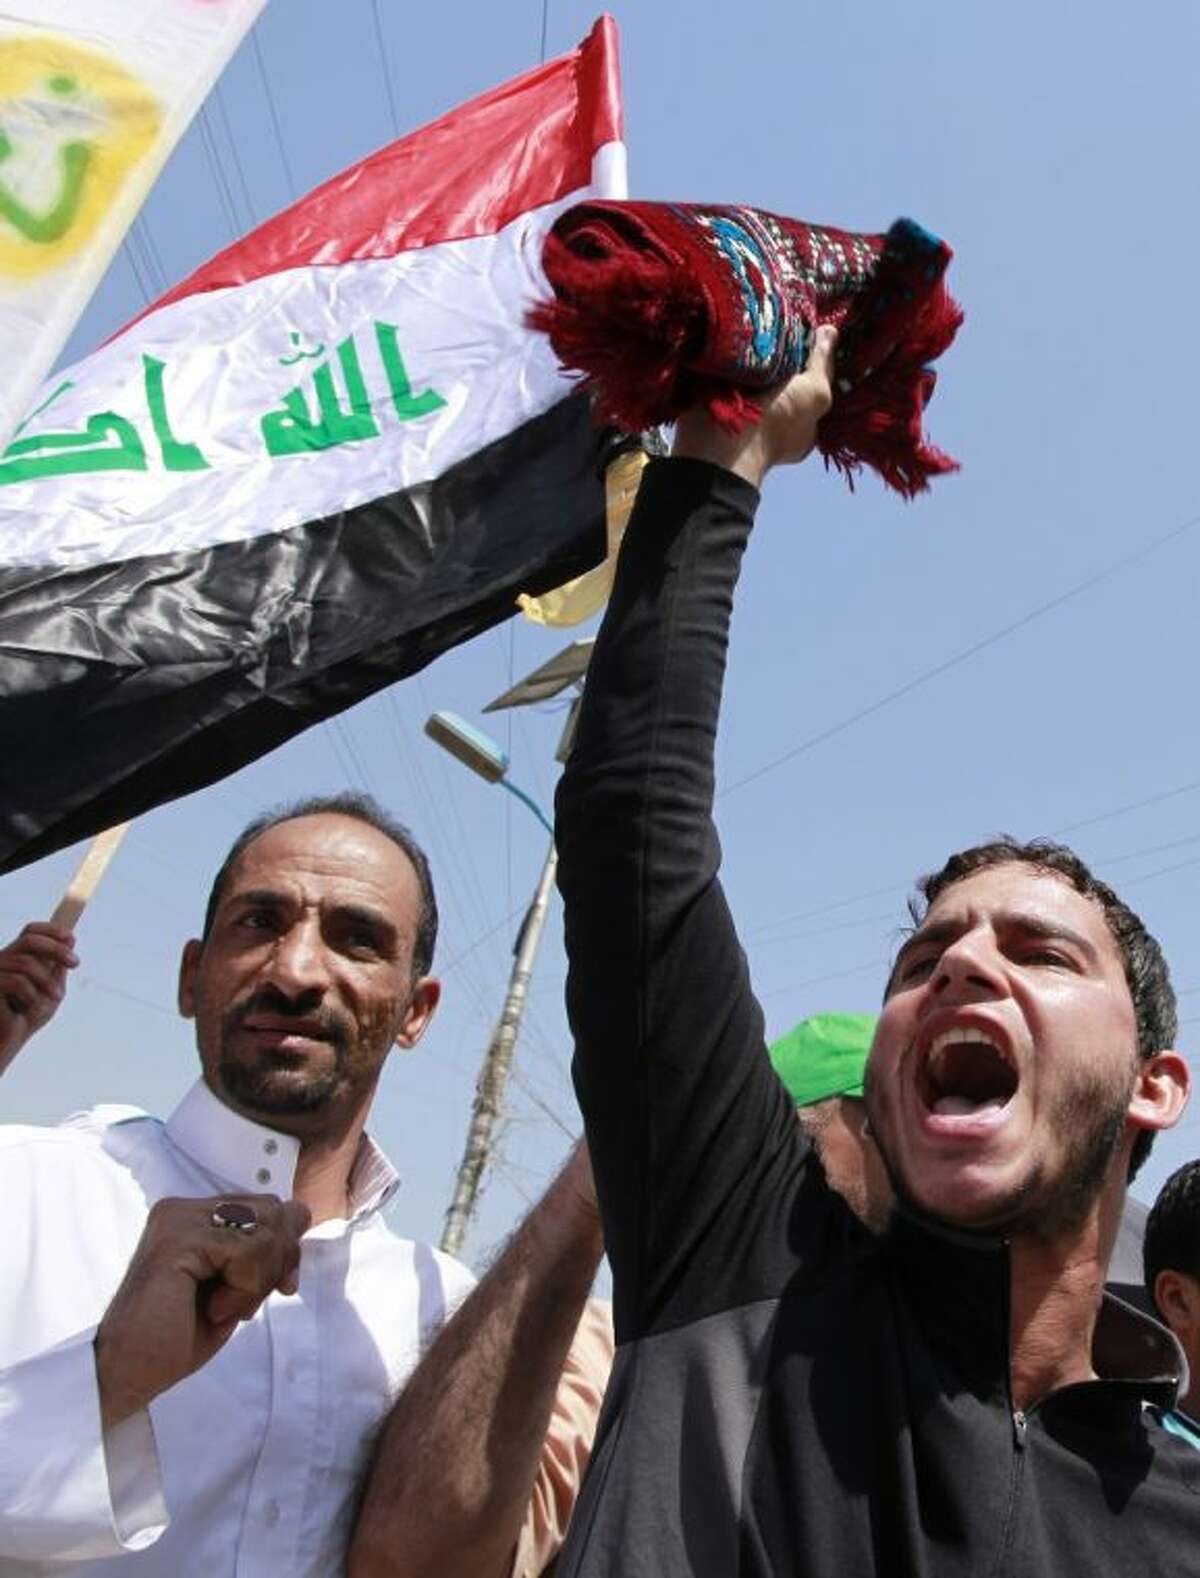 Followers of Shiite cleric Muqtada al-Sadr chant slogans against the U.S. and wave Iraqi and Syrian flags during a demonstration in Sadr City in Baghdad, Iraq, Friday. Followers of Shiite cleric Muqtada al-Sadr held rallies in Baghdad and the southern Iraqi city of Basra to denounce any Western strikes against Syria.